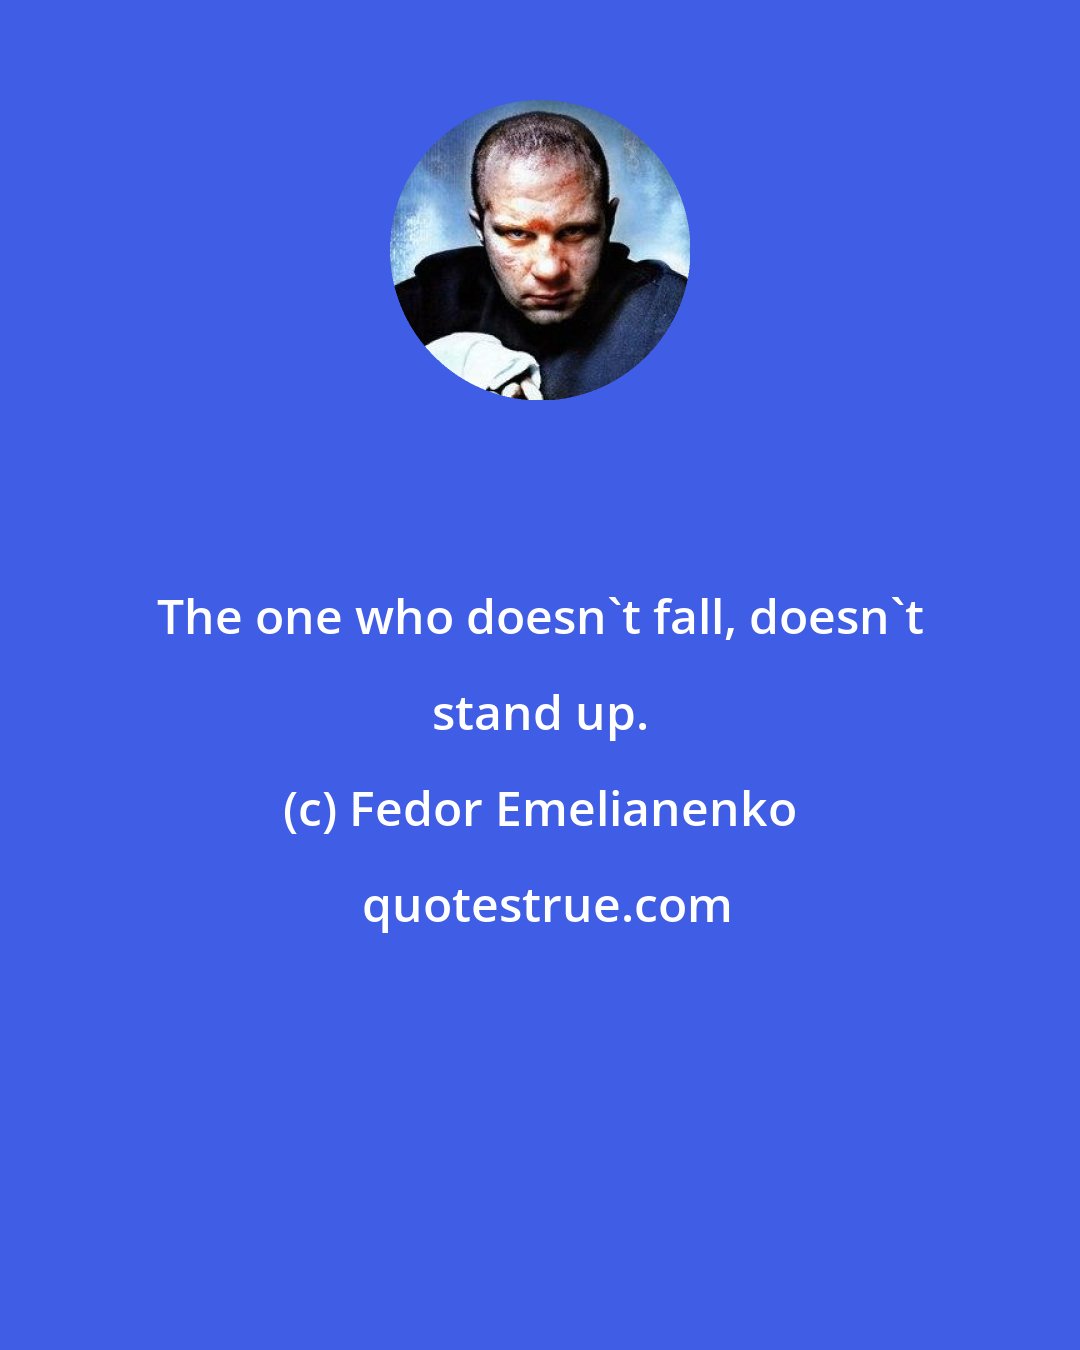 Fedor Emelianenko: The one who doesn't fall, doesn't stand up.